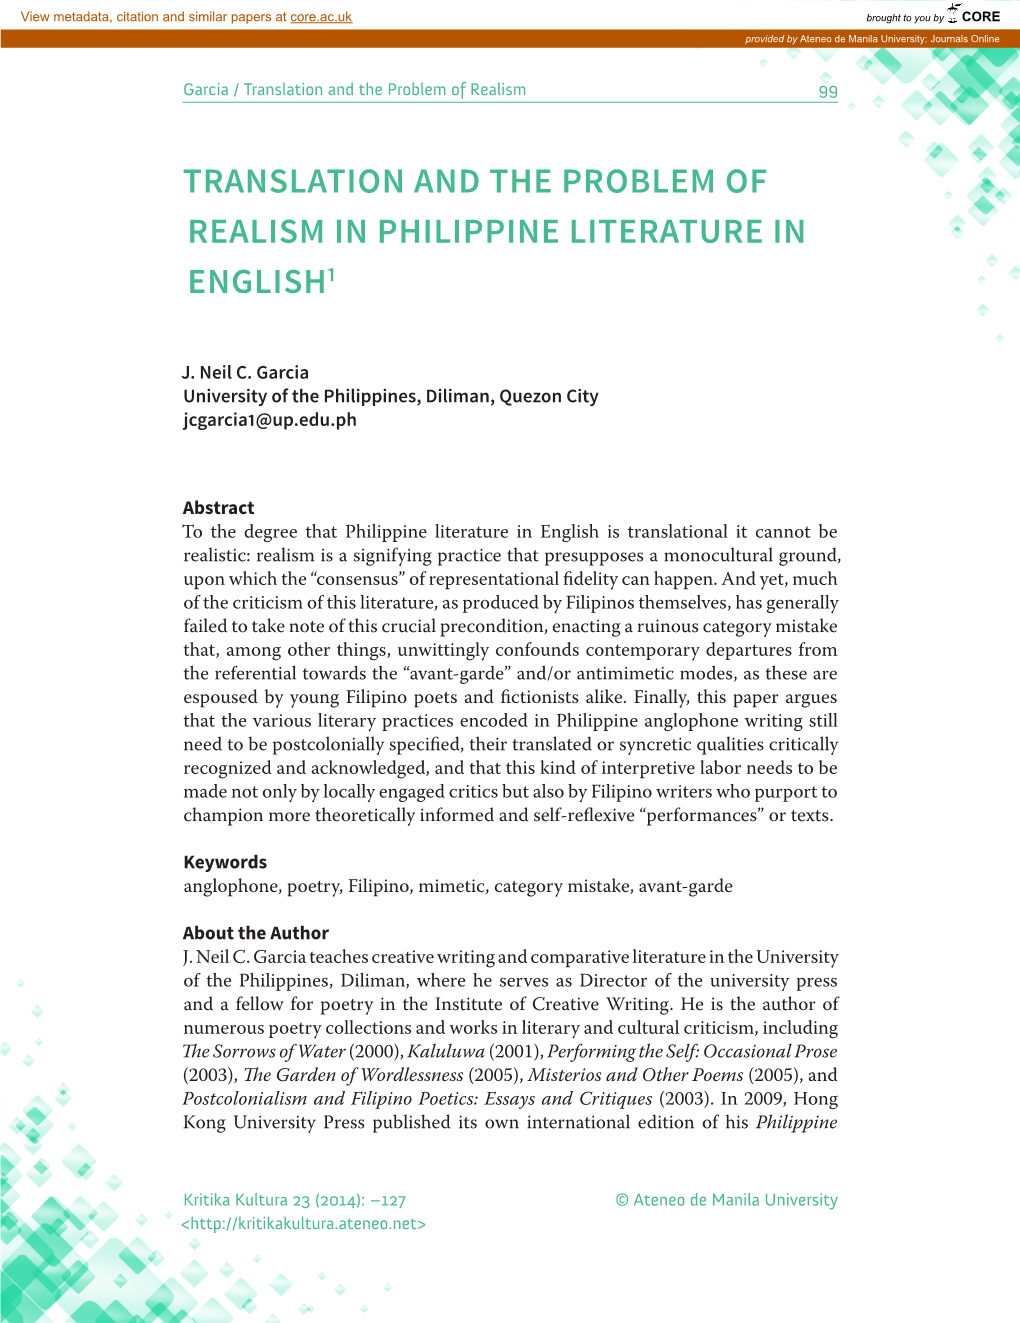 Translation and the Problem of Realism in Philippine Literature in English1